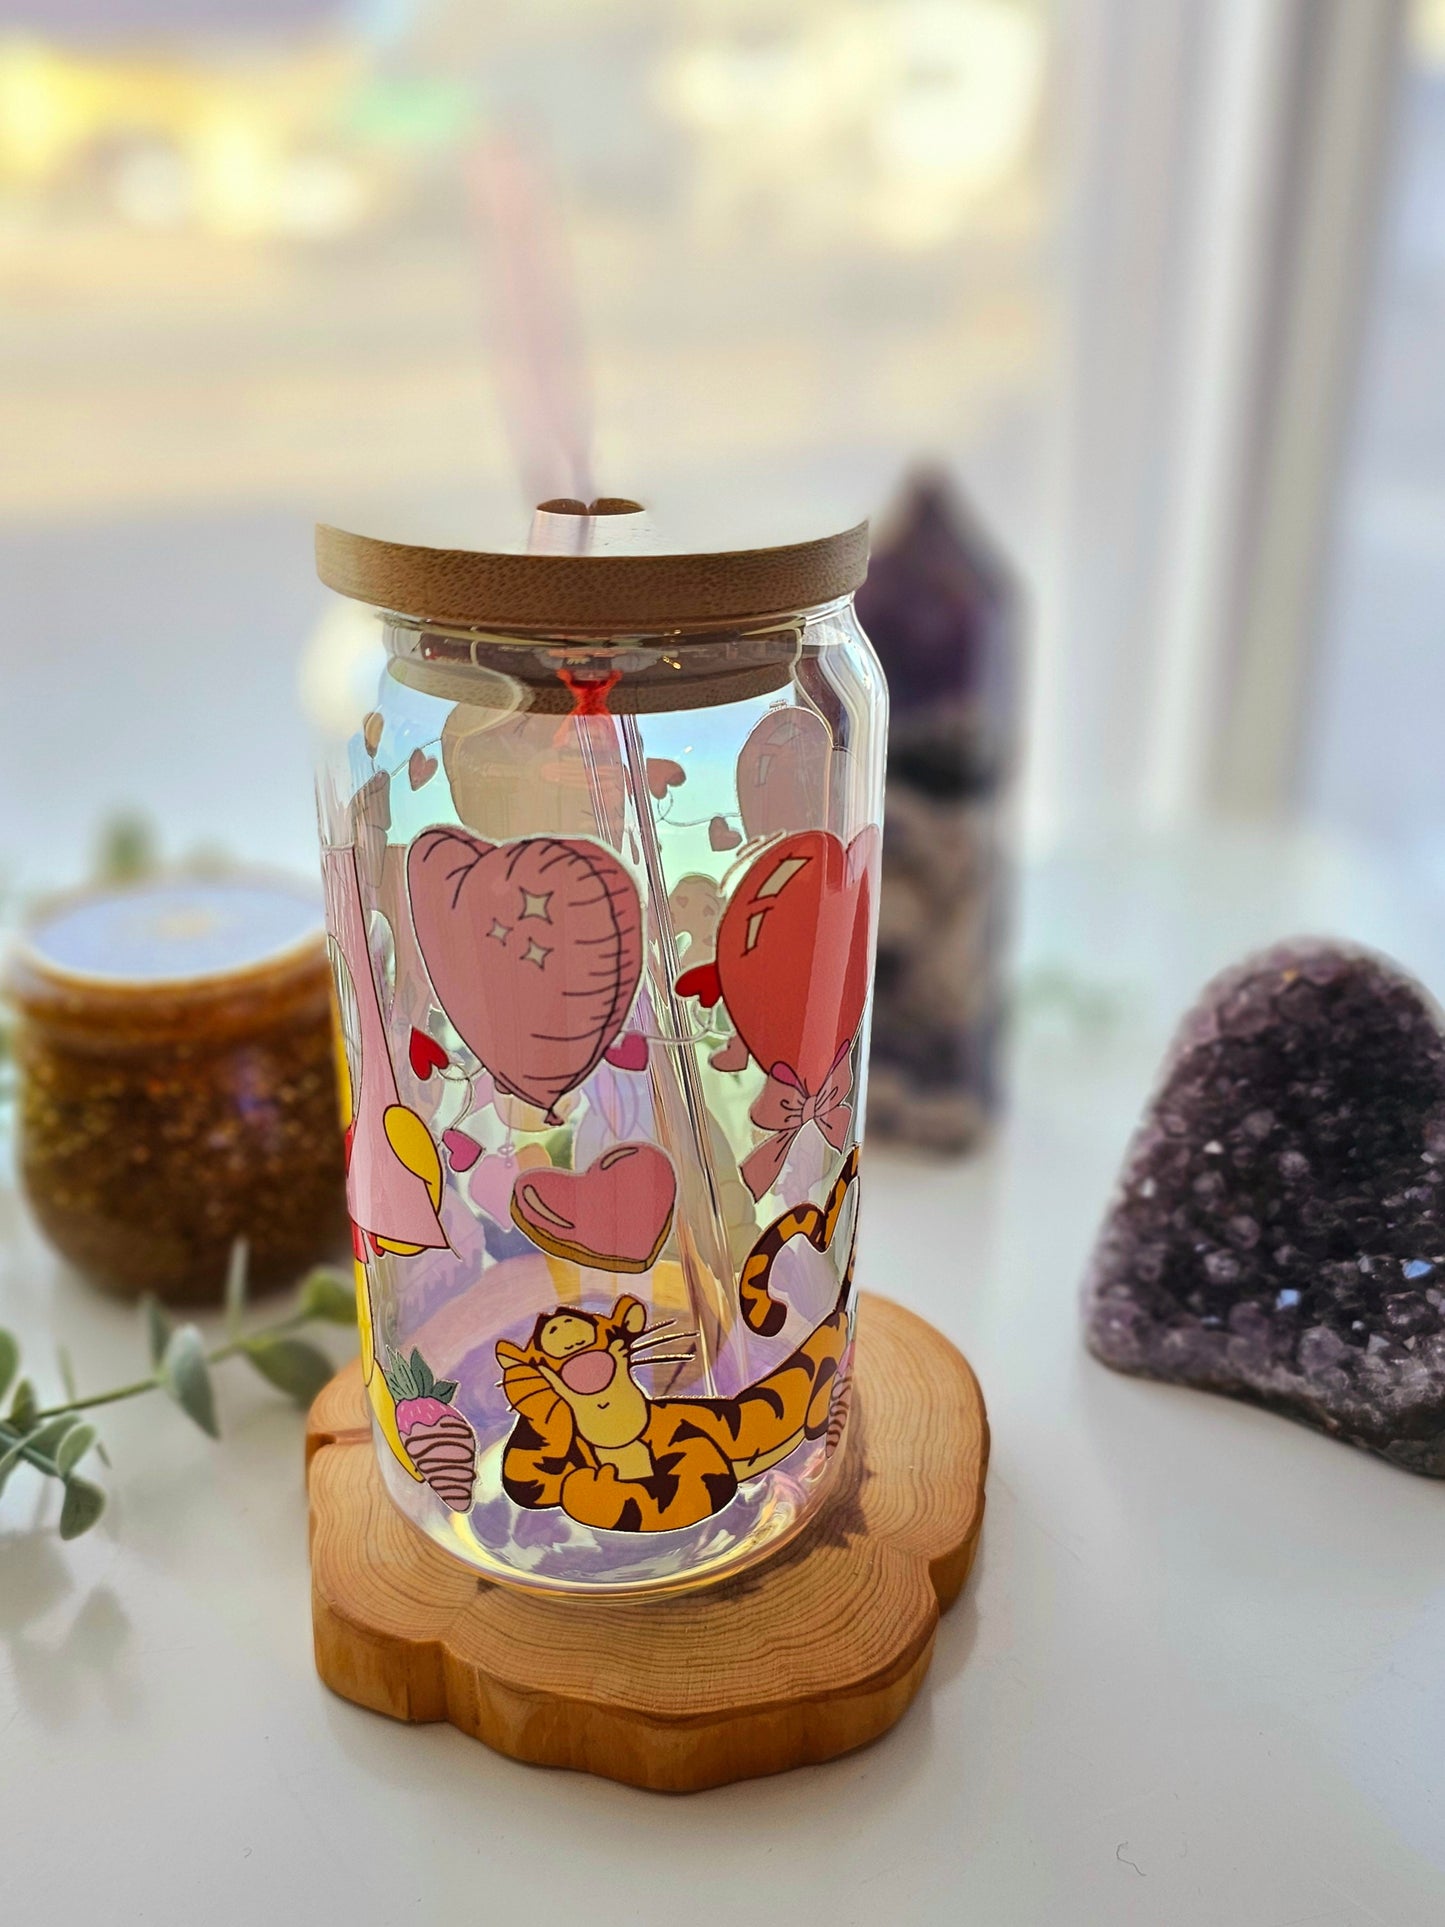 Winnie the Pooh Vday Cup